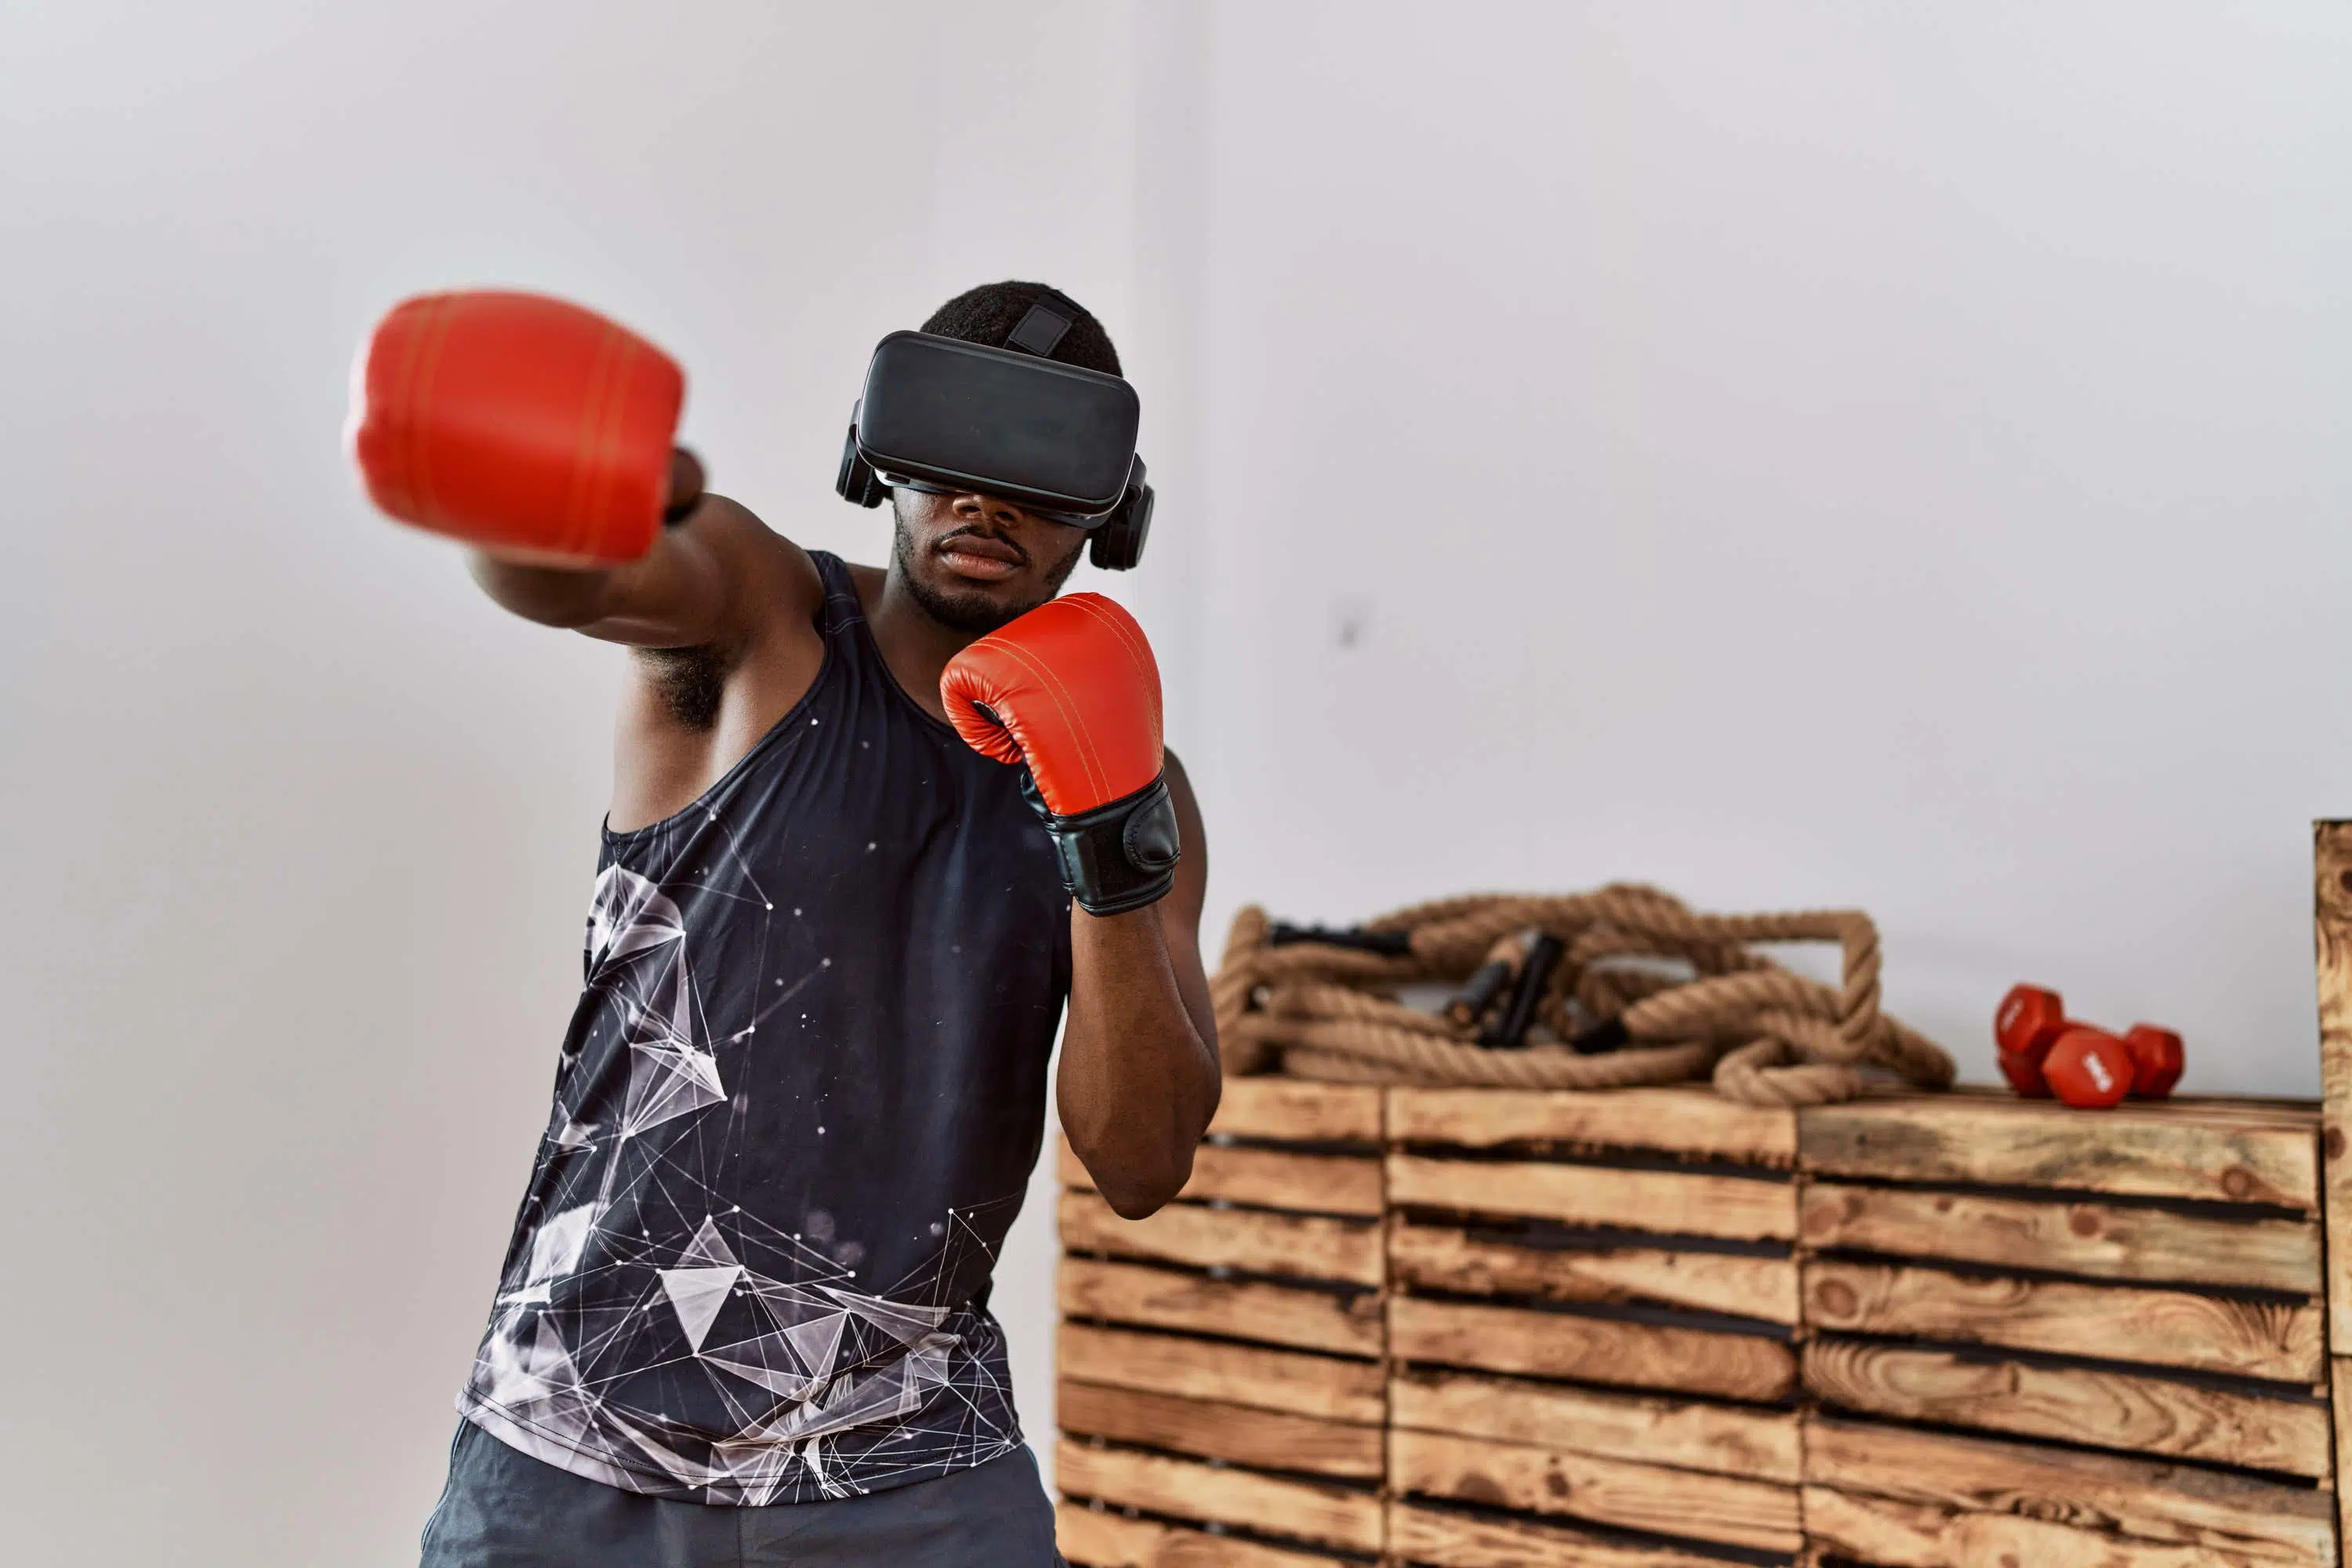 Boxing using vr scaled